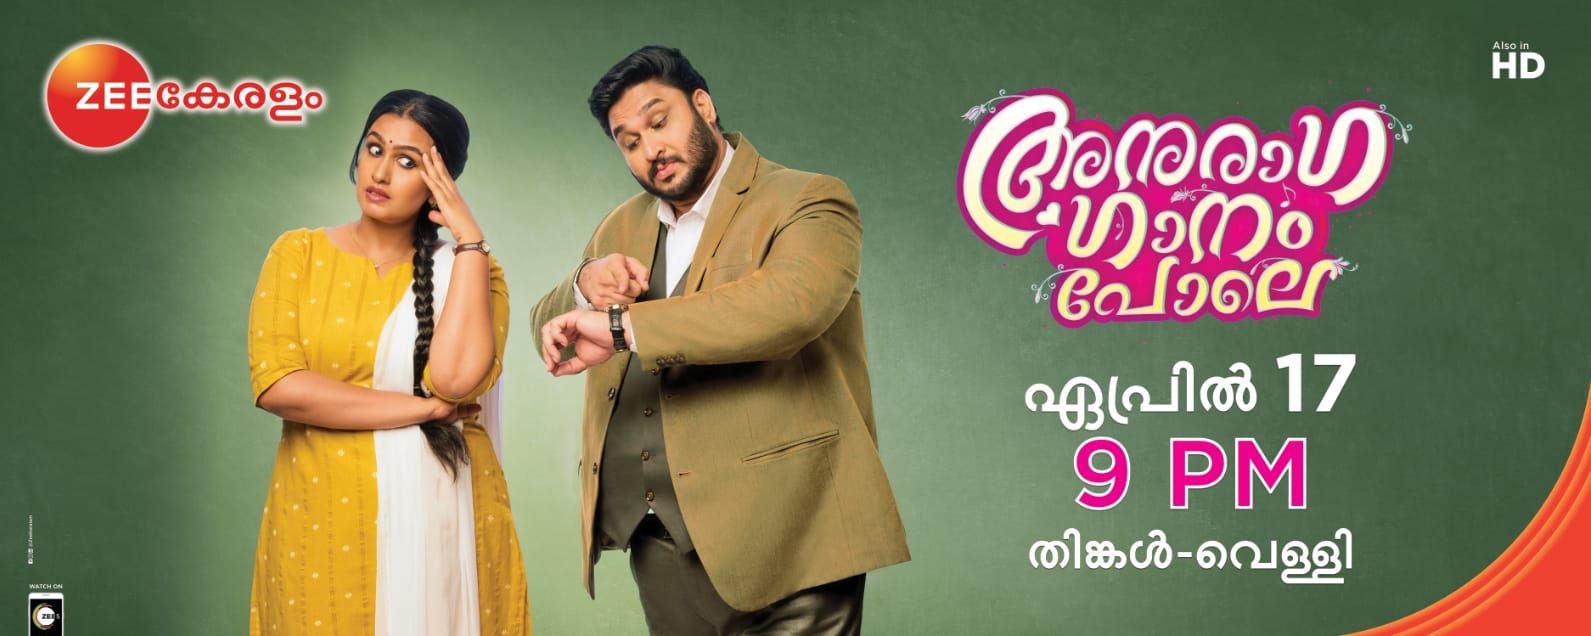 Wife is Beautiful Launching on 12th September at 07:00 PM on Zee Keralam 5